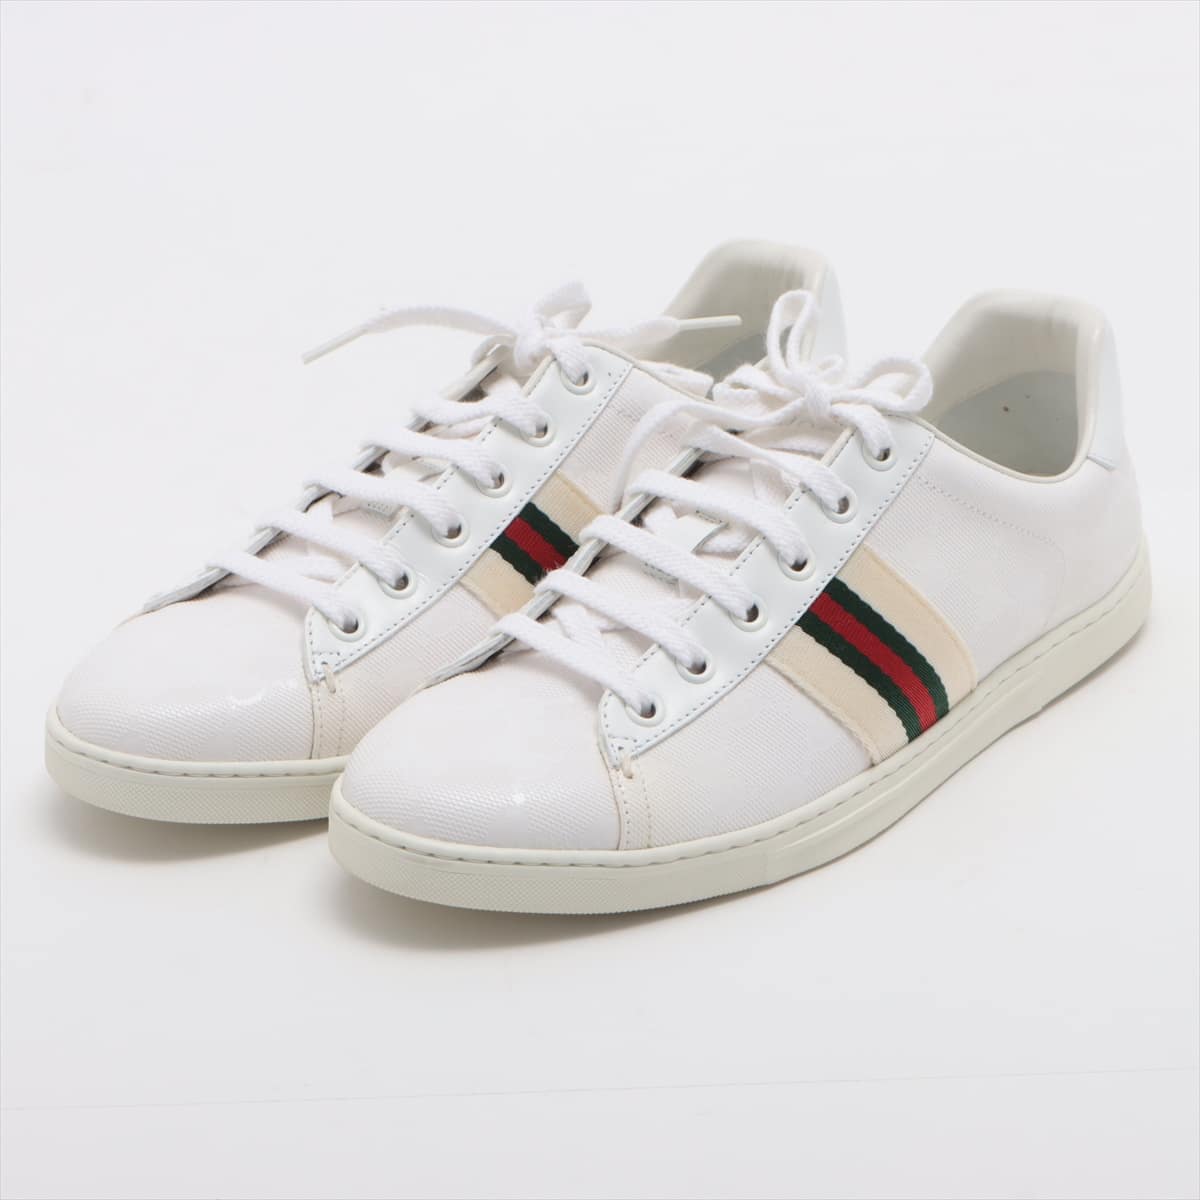 Gucci Sherry Line Leather Sneakers 37 Ladies' White 226535